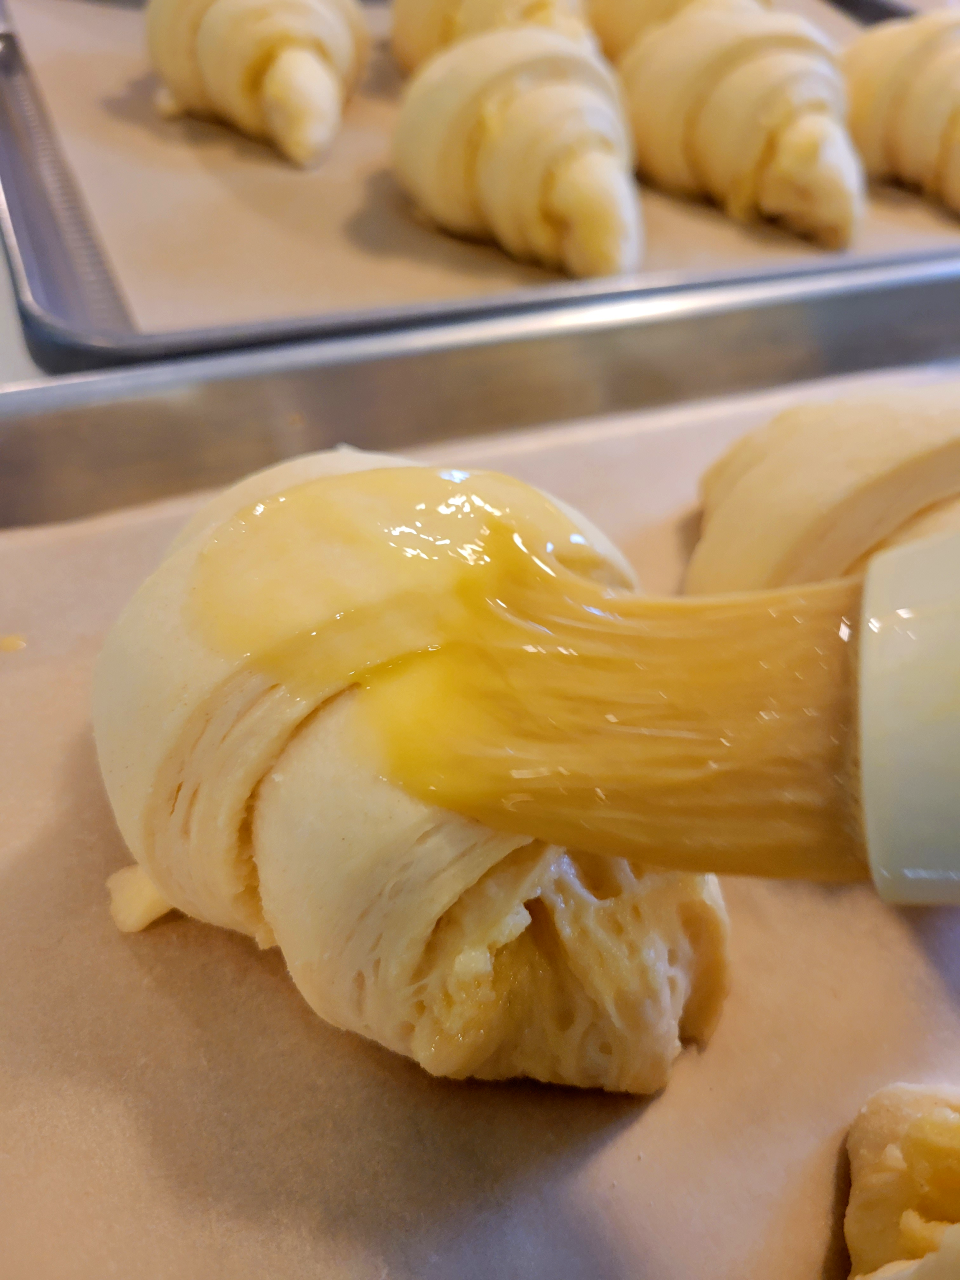 An unbaked croissant on a parchment-lined baking sheet is being brushed with butter. Several other unbaked croissants on a different baking sheet can be seen in the background. Photo courtesy of Kat Fuenty.